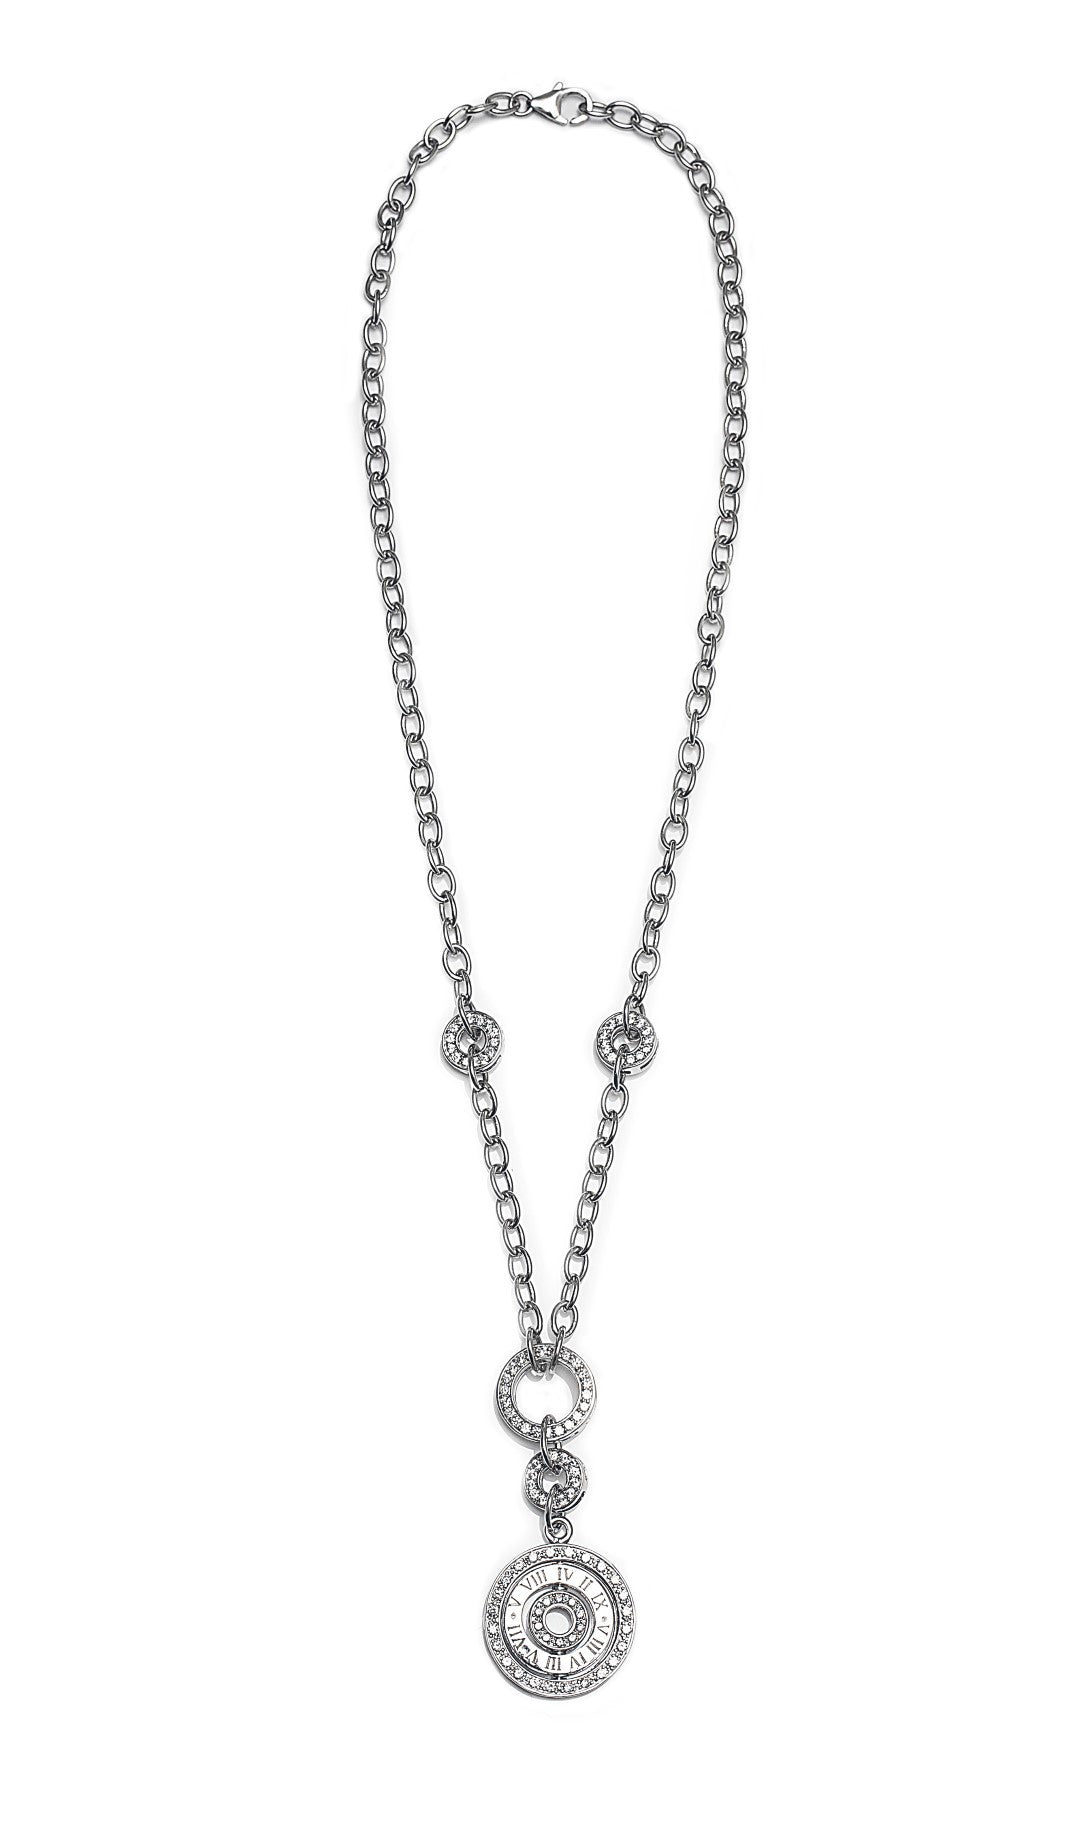 Amazing Long Juicy Drop Necklace in Sterling Silver & Cubic Zirconia Stones. Worldwide shipping. Jewellery by Bellagio & Co.